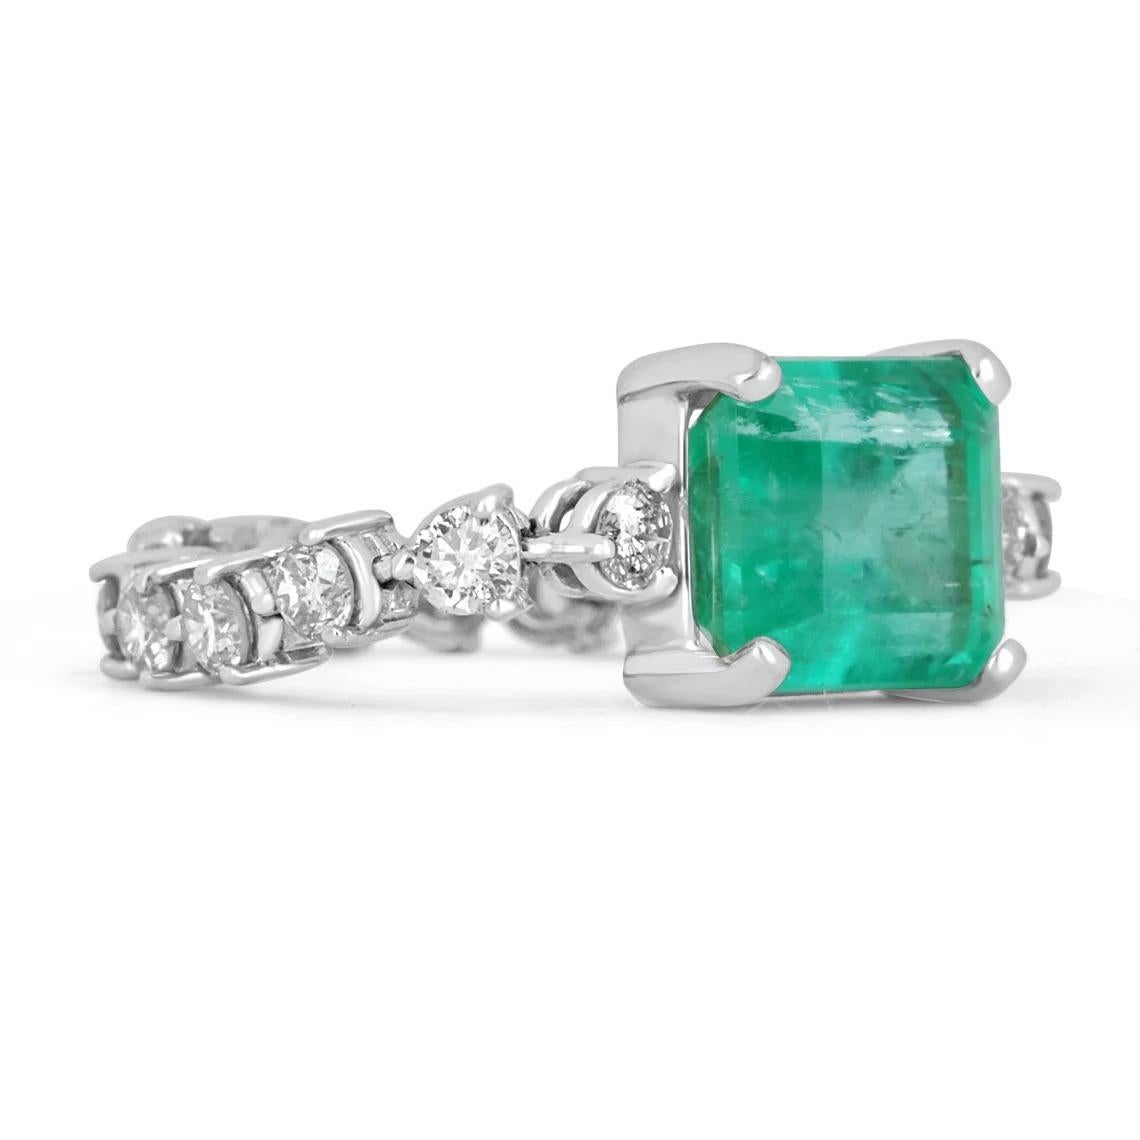 Elegantly displayed is a natural, emerald-cut Colombian emerald and diamond accent ring. The center gem is a beautiful quality, emerald cut, emerald filled with life and brilliance! Among the emeralds, impressive qualities are their vibrant color